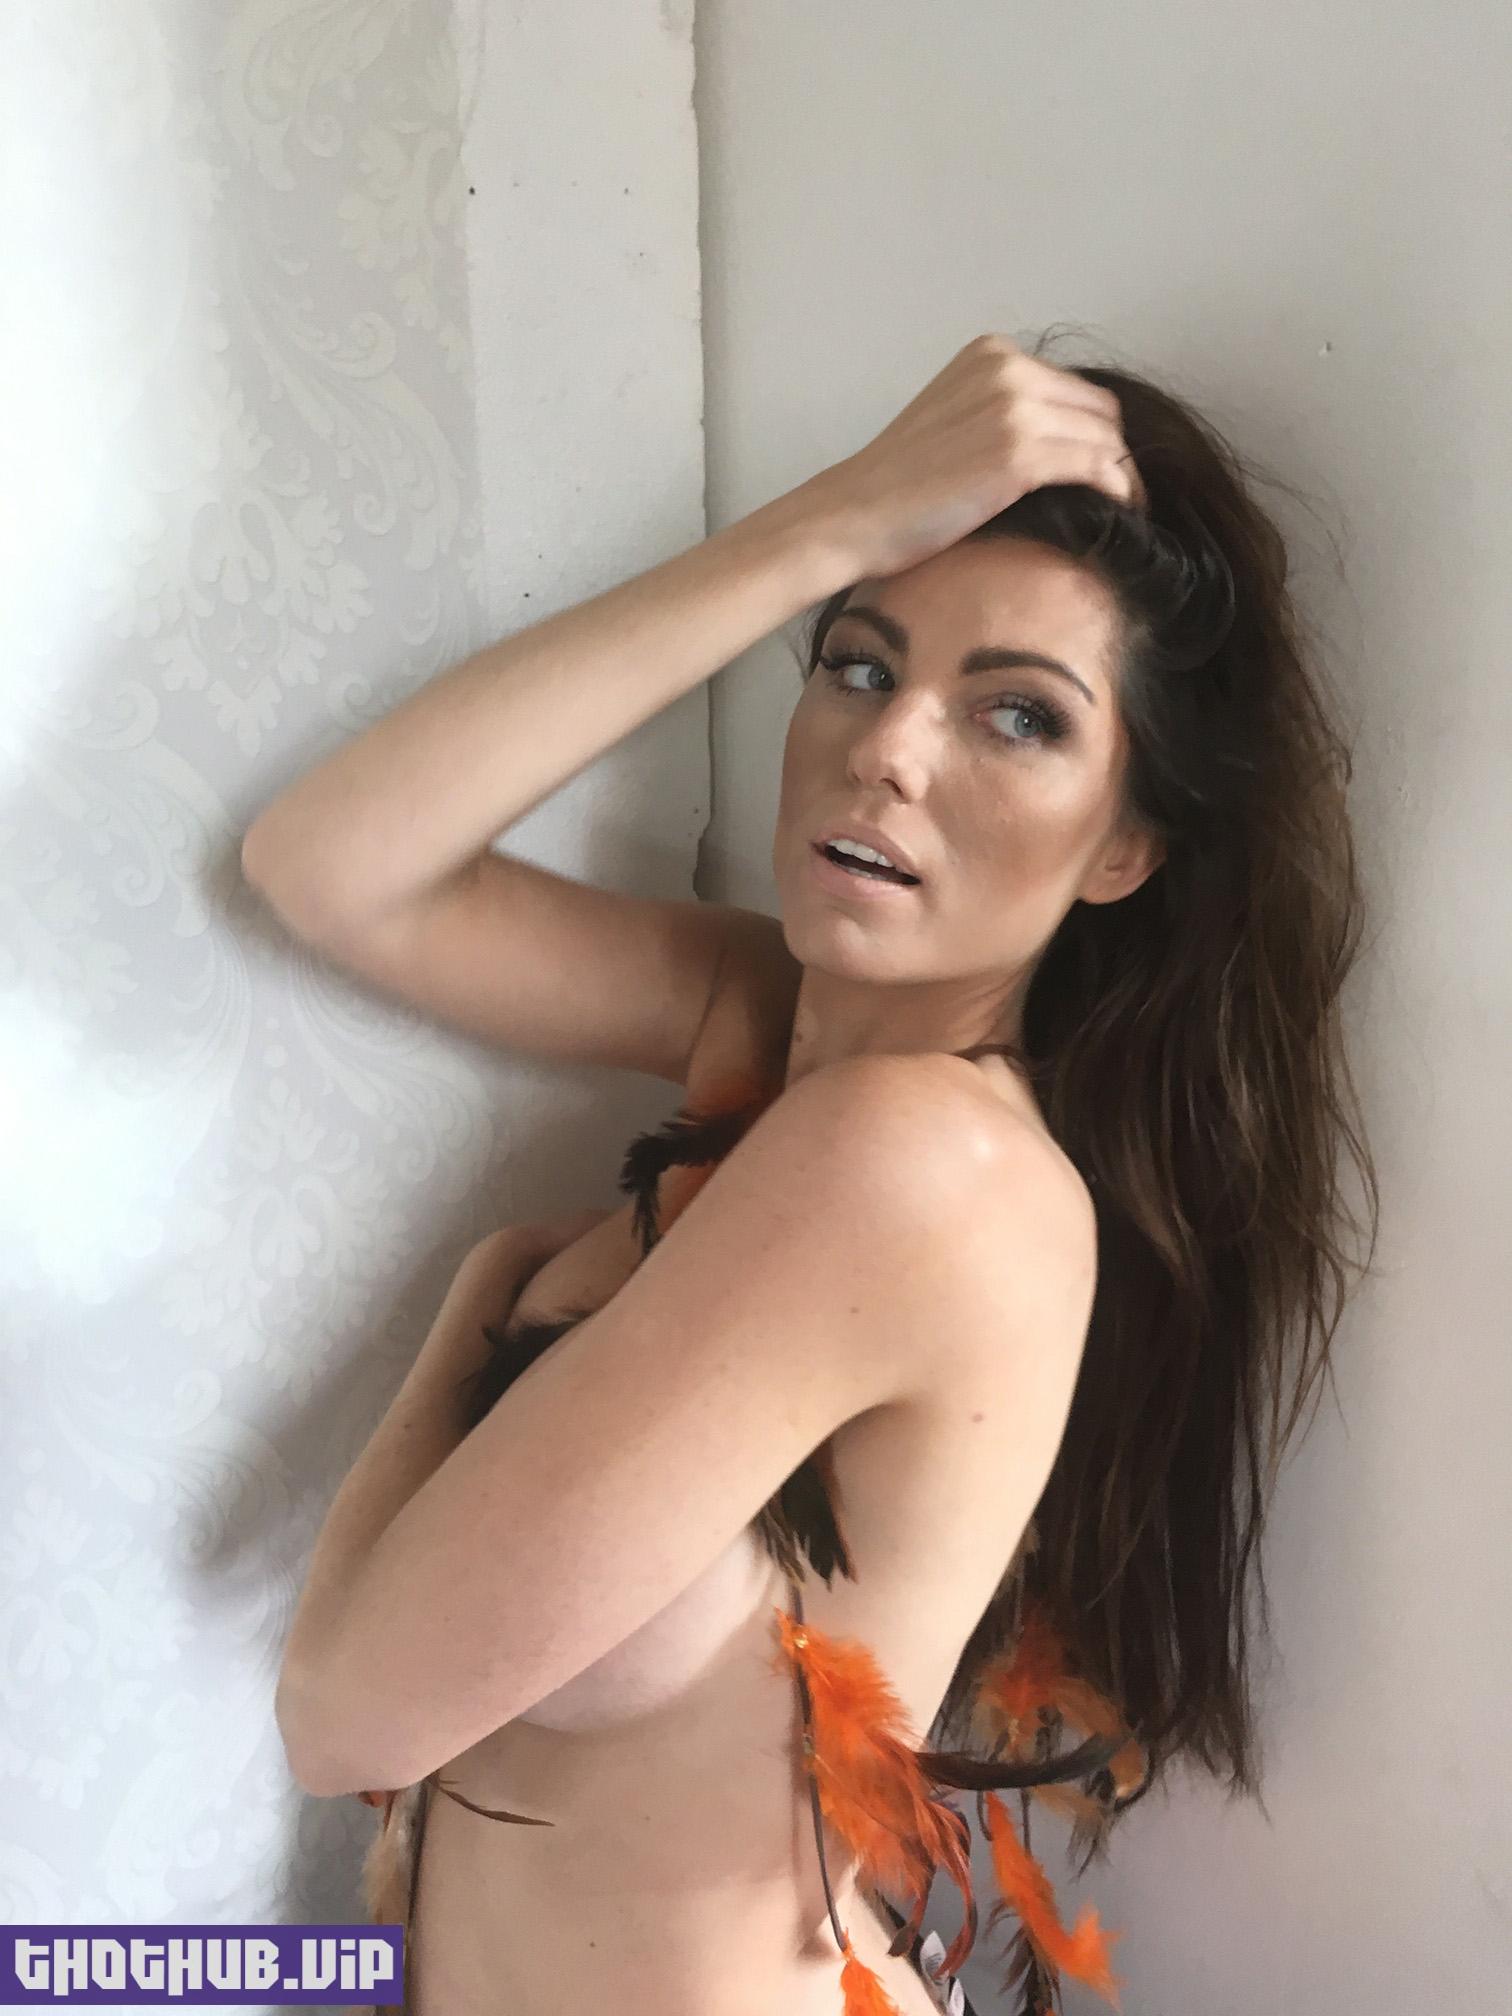 Big Brother star Louise Cliffe nude photos leaked from iCloud The Fappening 2017